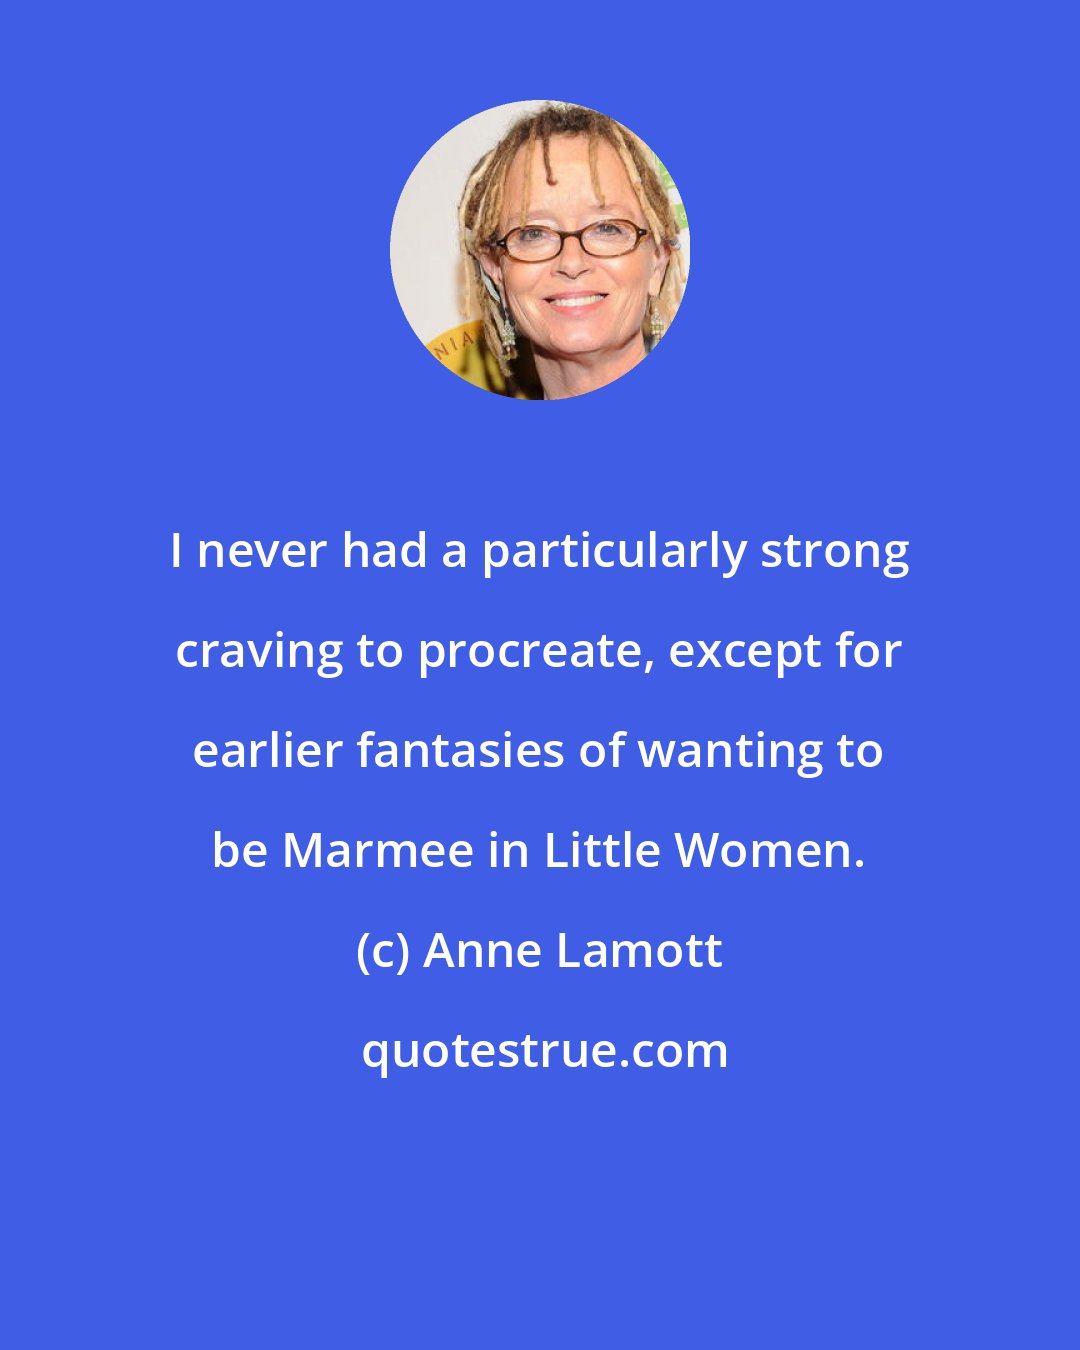 Anne Lamott: I never had a particularly strong craving to procreate, except for earlier fantasies of wanting to be Marmee in Little Women.